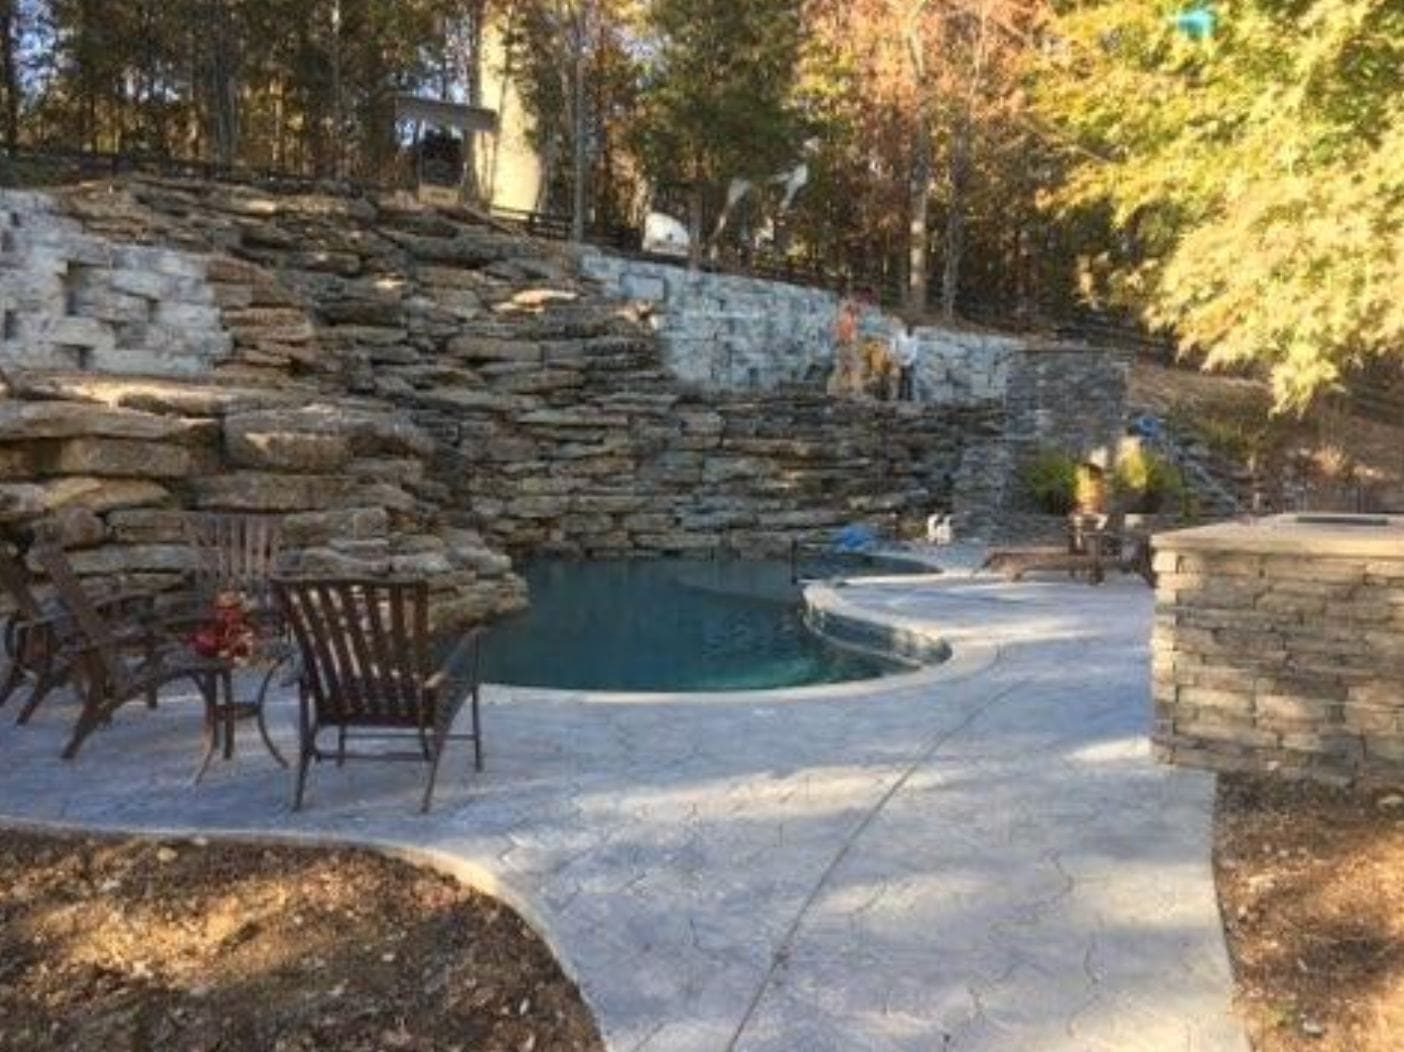 A pool with chairs and rocks around it